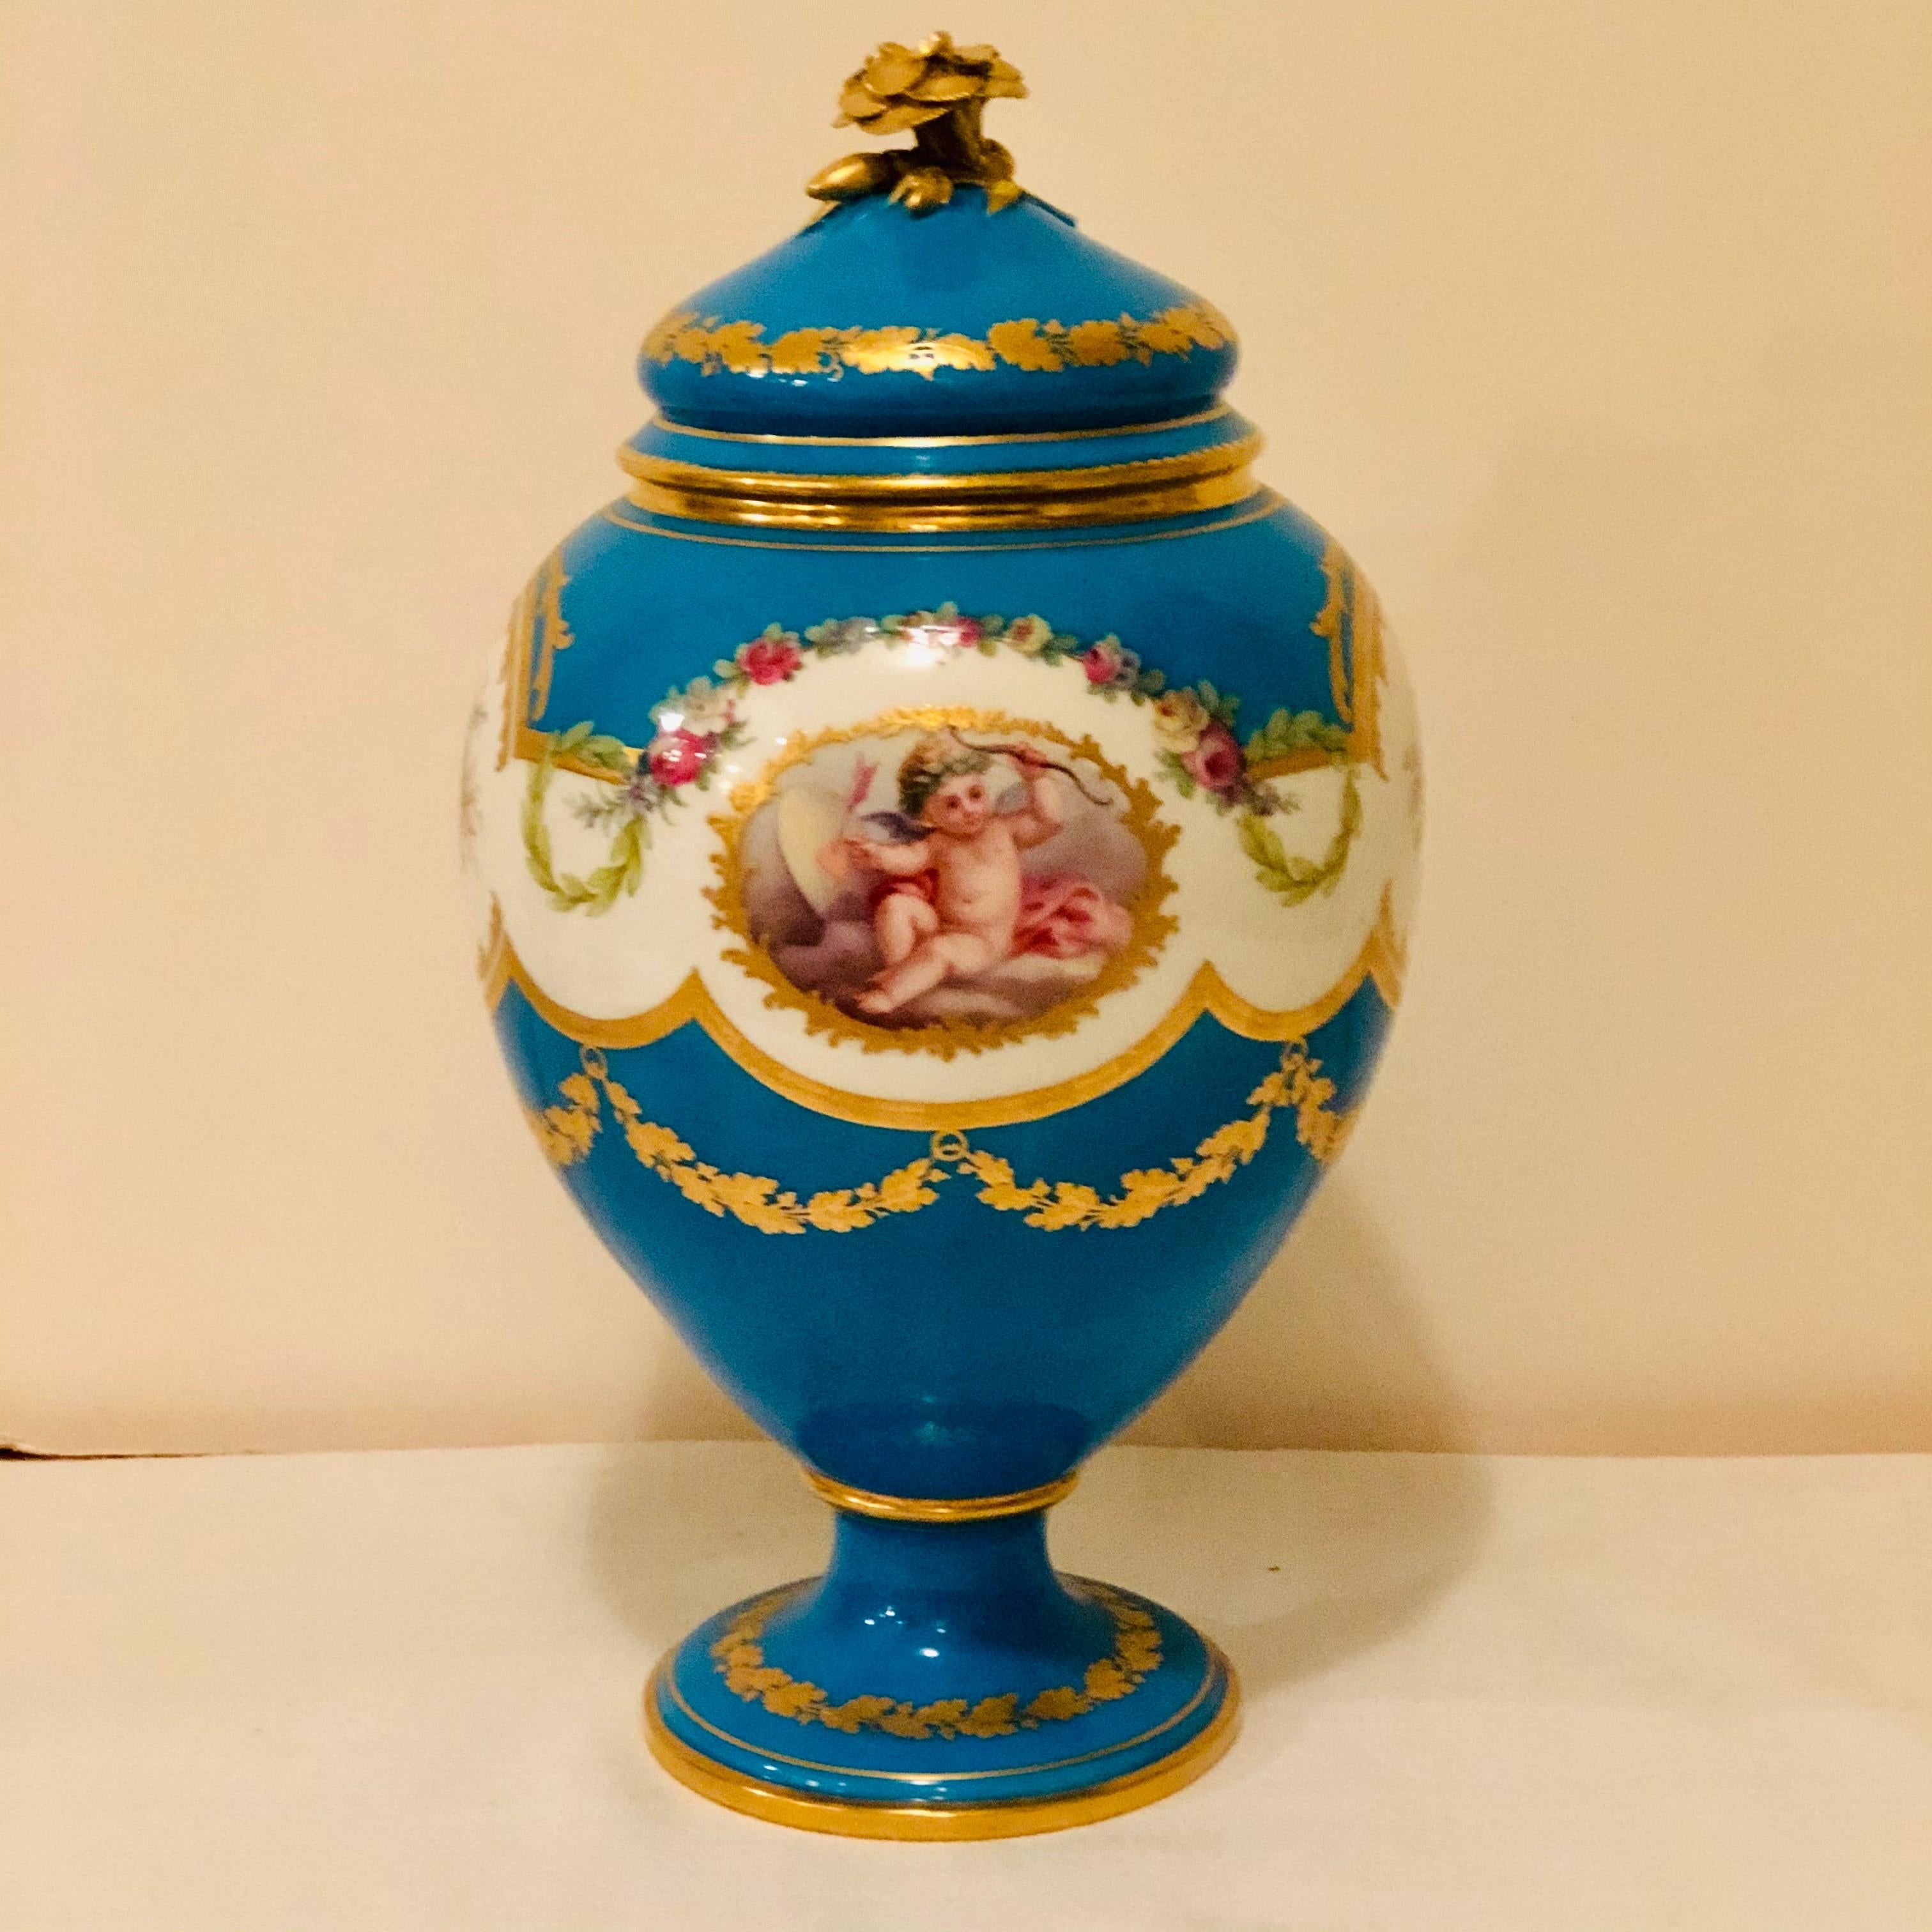 Celeste Blue Minton Urn Painted with Cherubs and Flowers in the Style of Sèvres 1